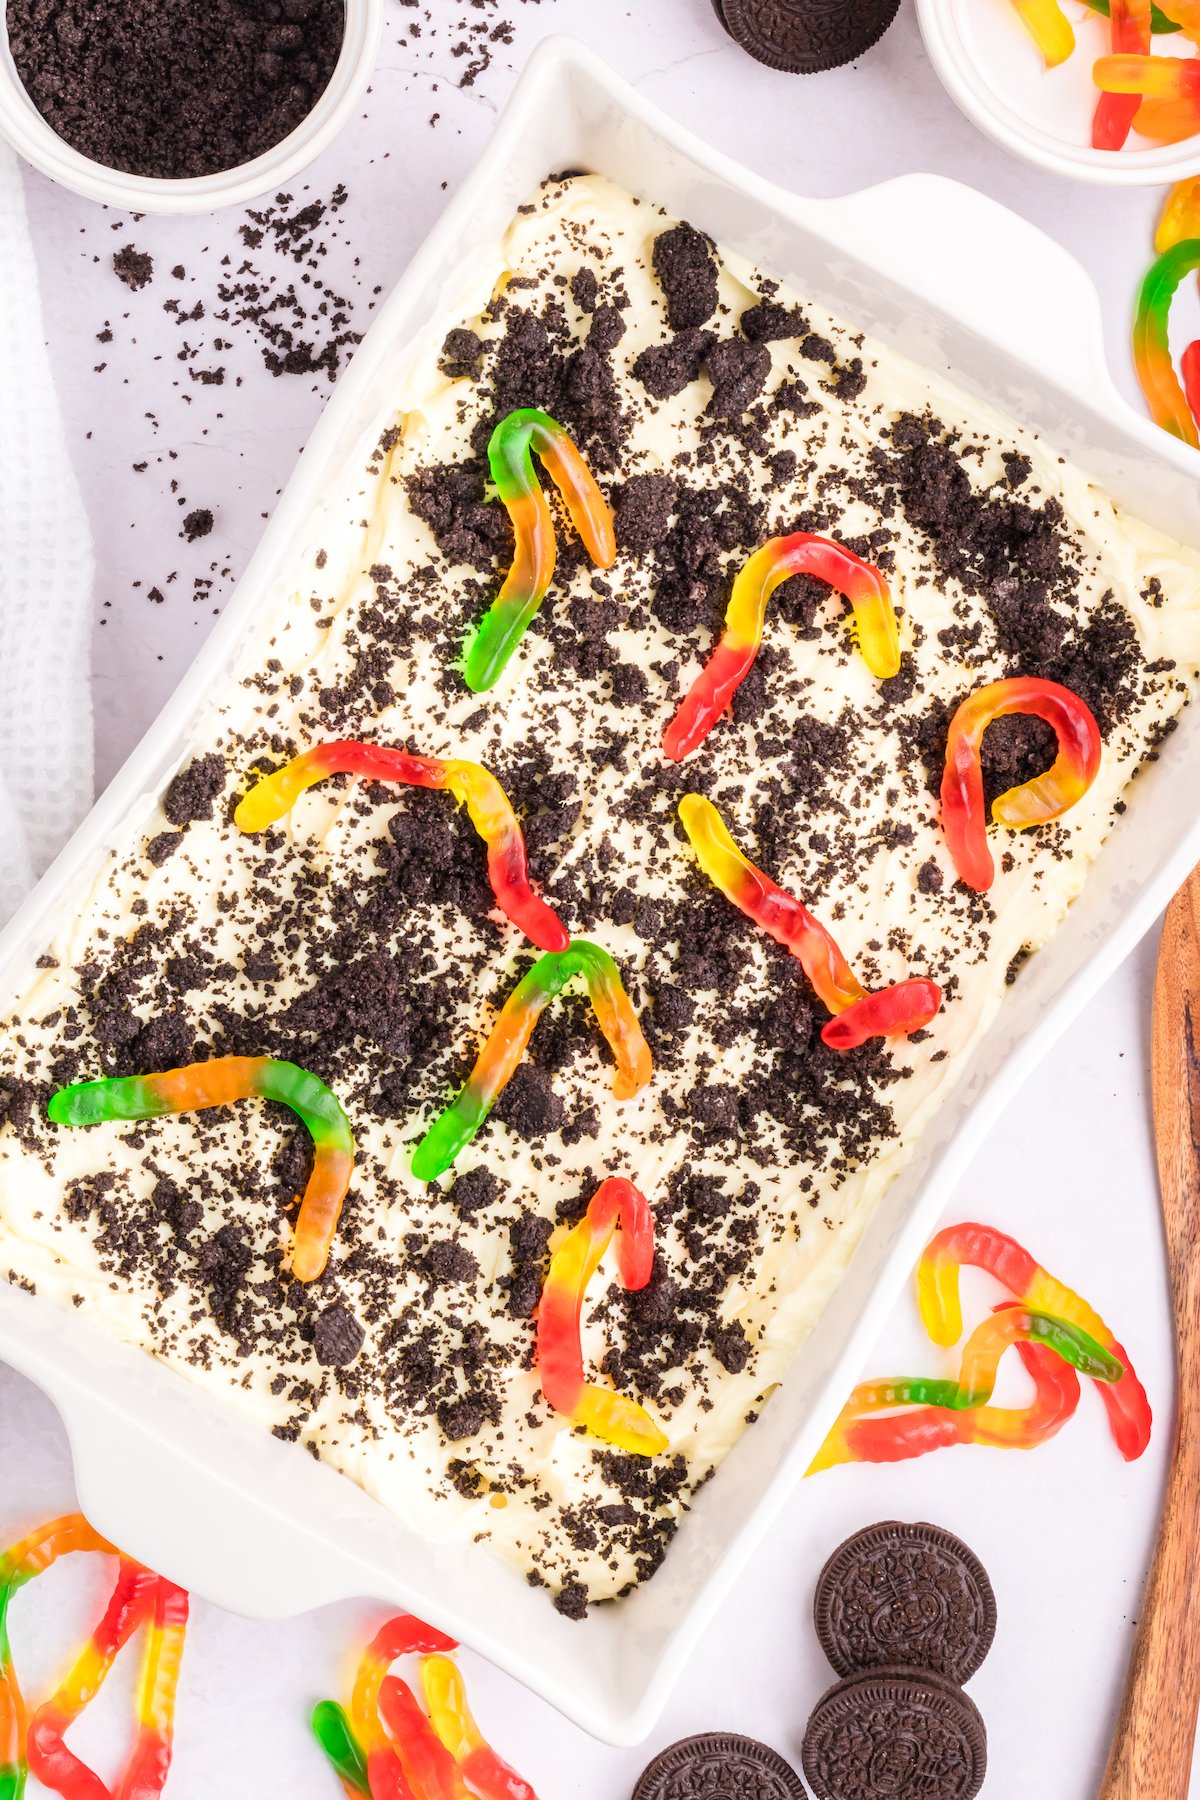 A large baking dish is filled with an Oreo dirt cake that's topped with crumbled cookies and colorful gummy worms.